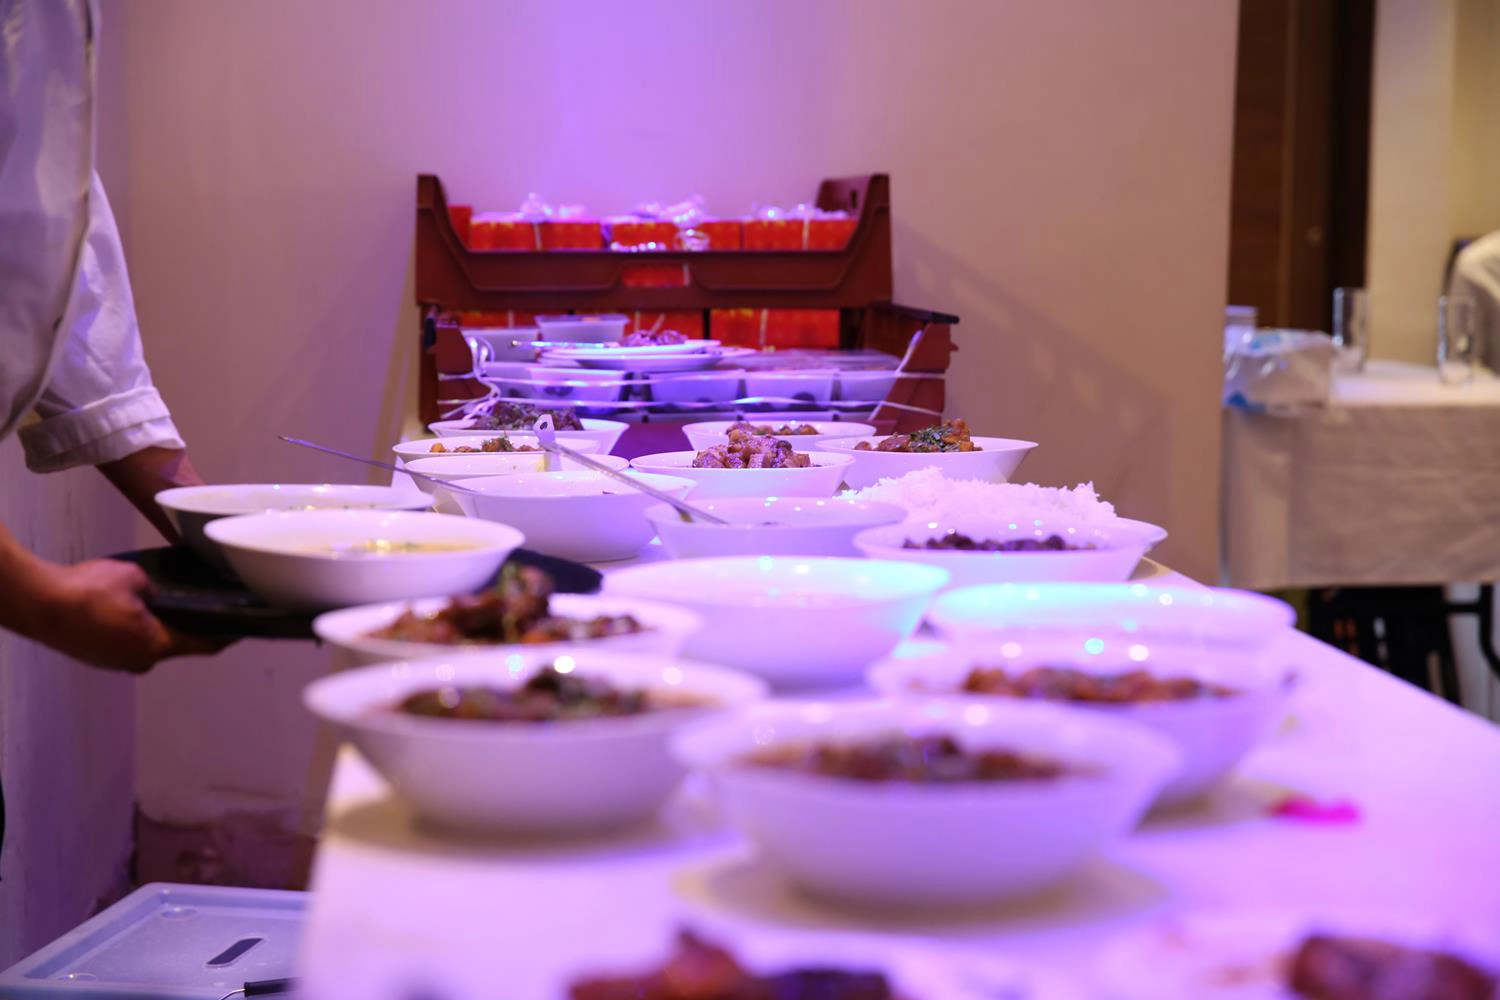 Food at an Indian Wedding Dinner by MAKSAM Photography